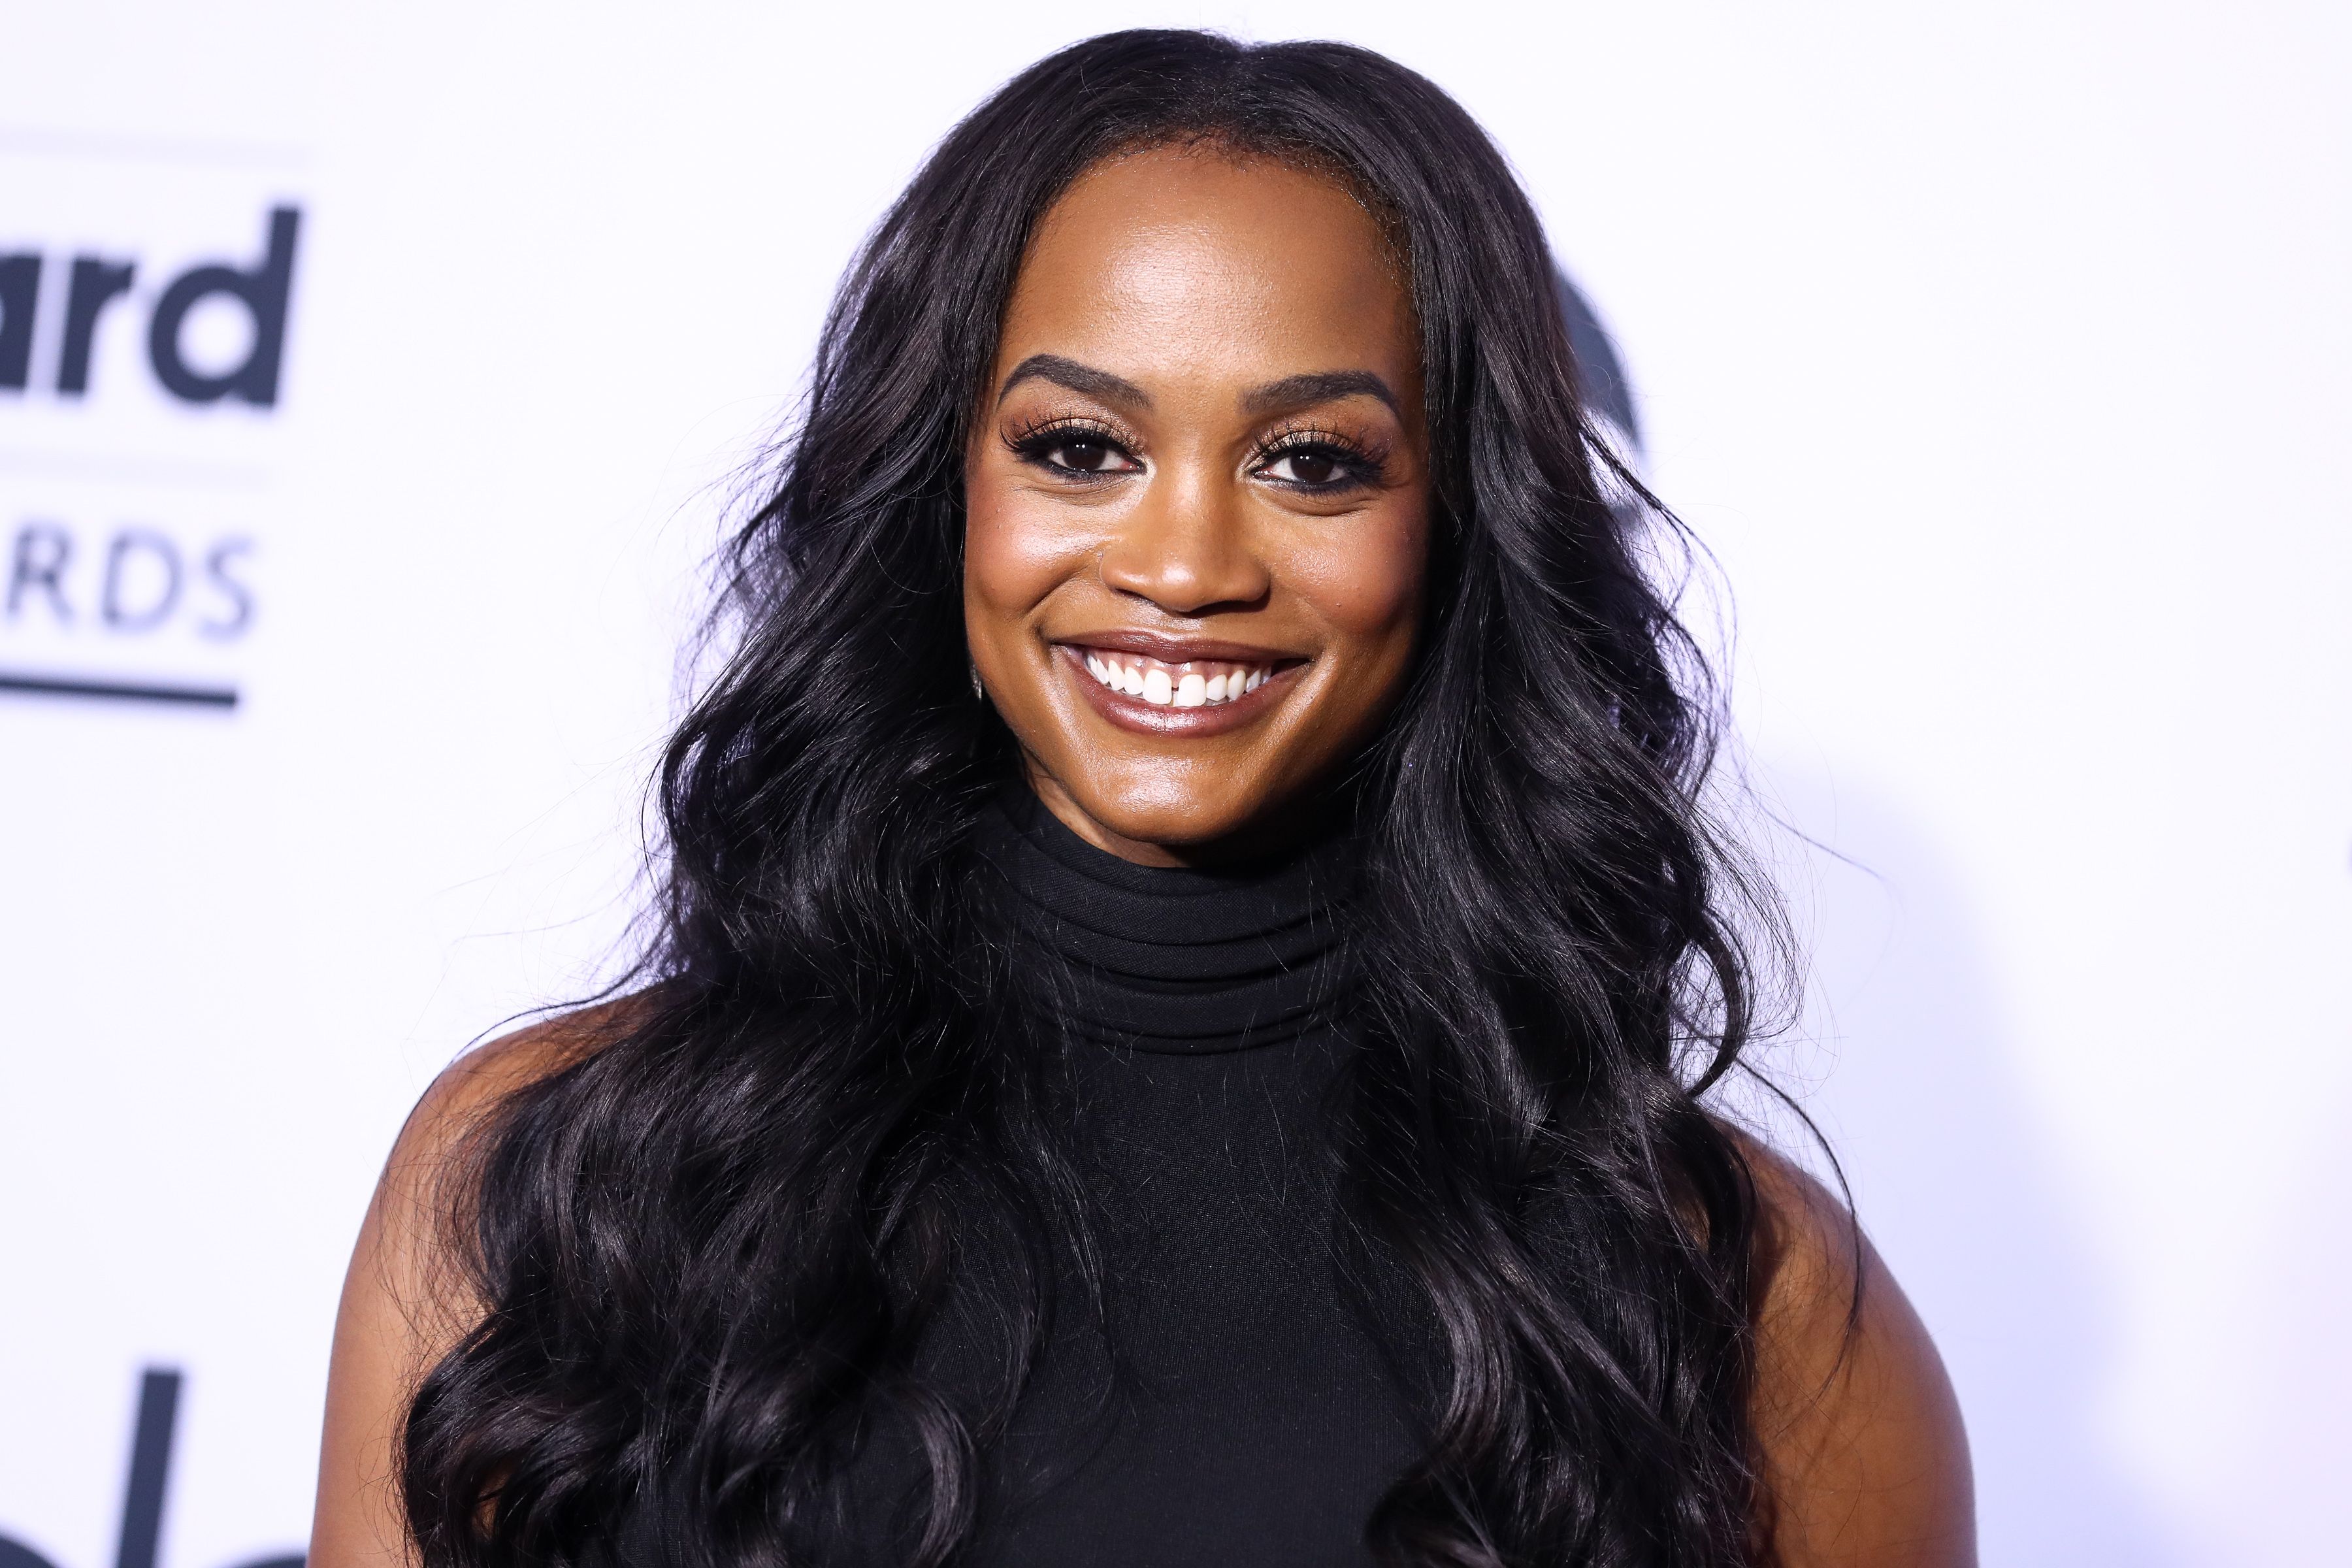 <p>Attorney Rachel Lindsay made history in 2017 when she was cast as the lead on ABC's hit reality show "The Bachelorette." The move made her the first Black star to topline the hit reality franchise. Three years later, ABC cast its first Black leading man on the show's counterpart…</p>